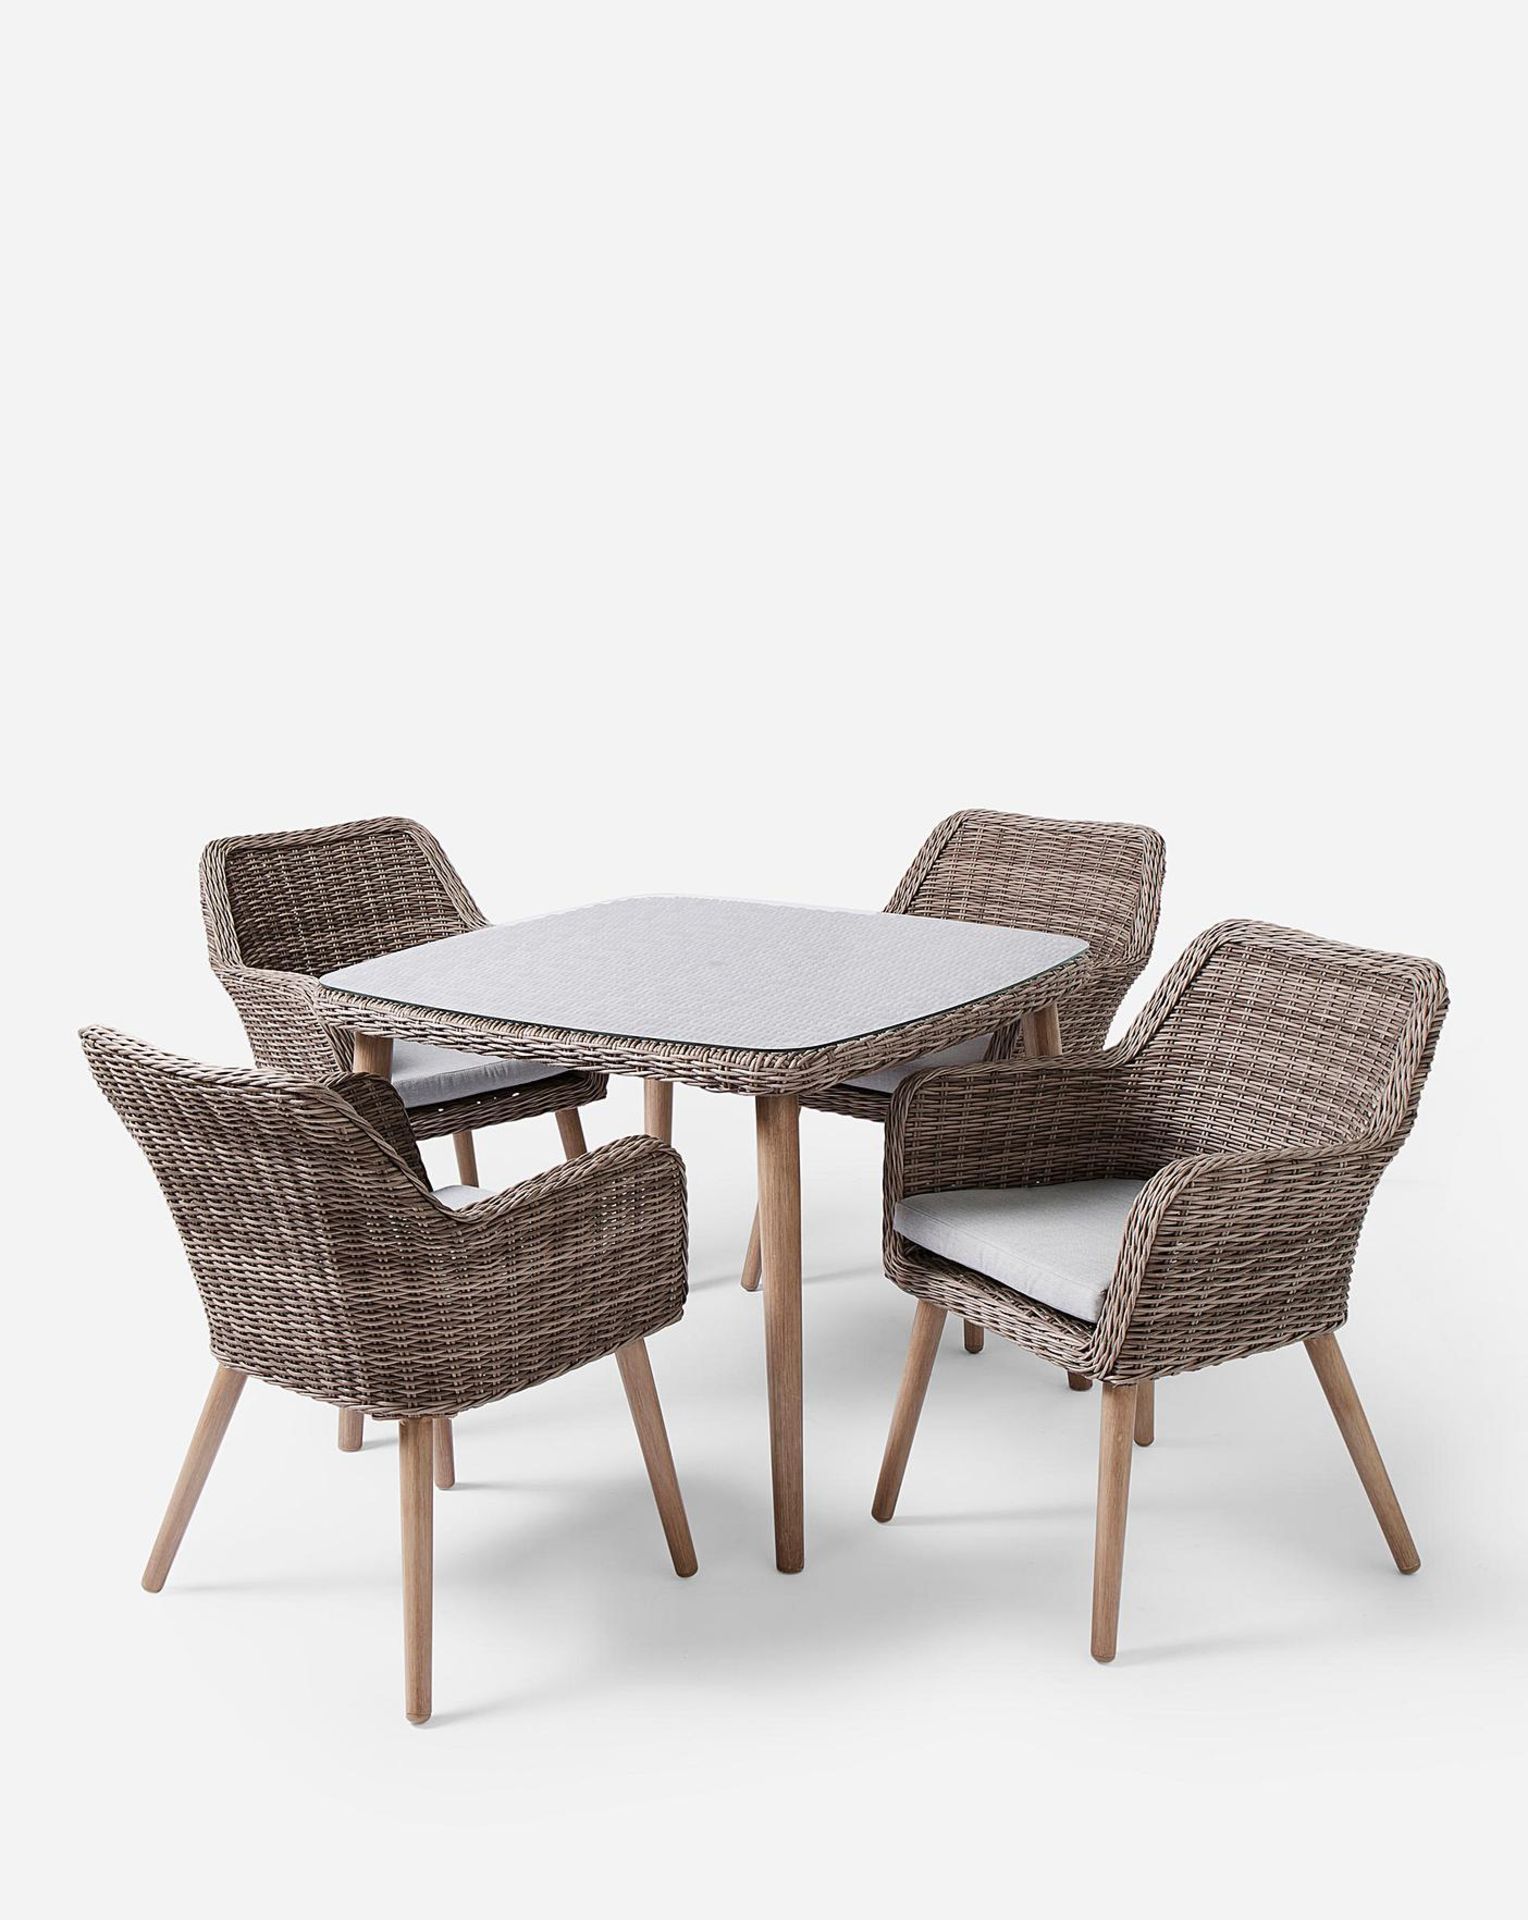 BRAND NEW Maldives 4 Seater Dining Set GREY. RRP £879 EACH. This 4 seater dining set featuring 4 - Image 3 of 3